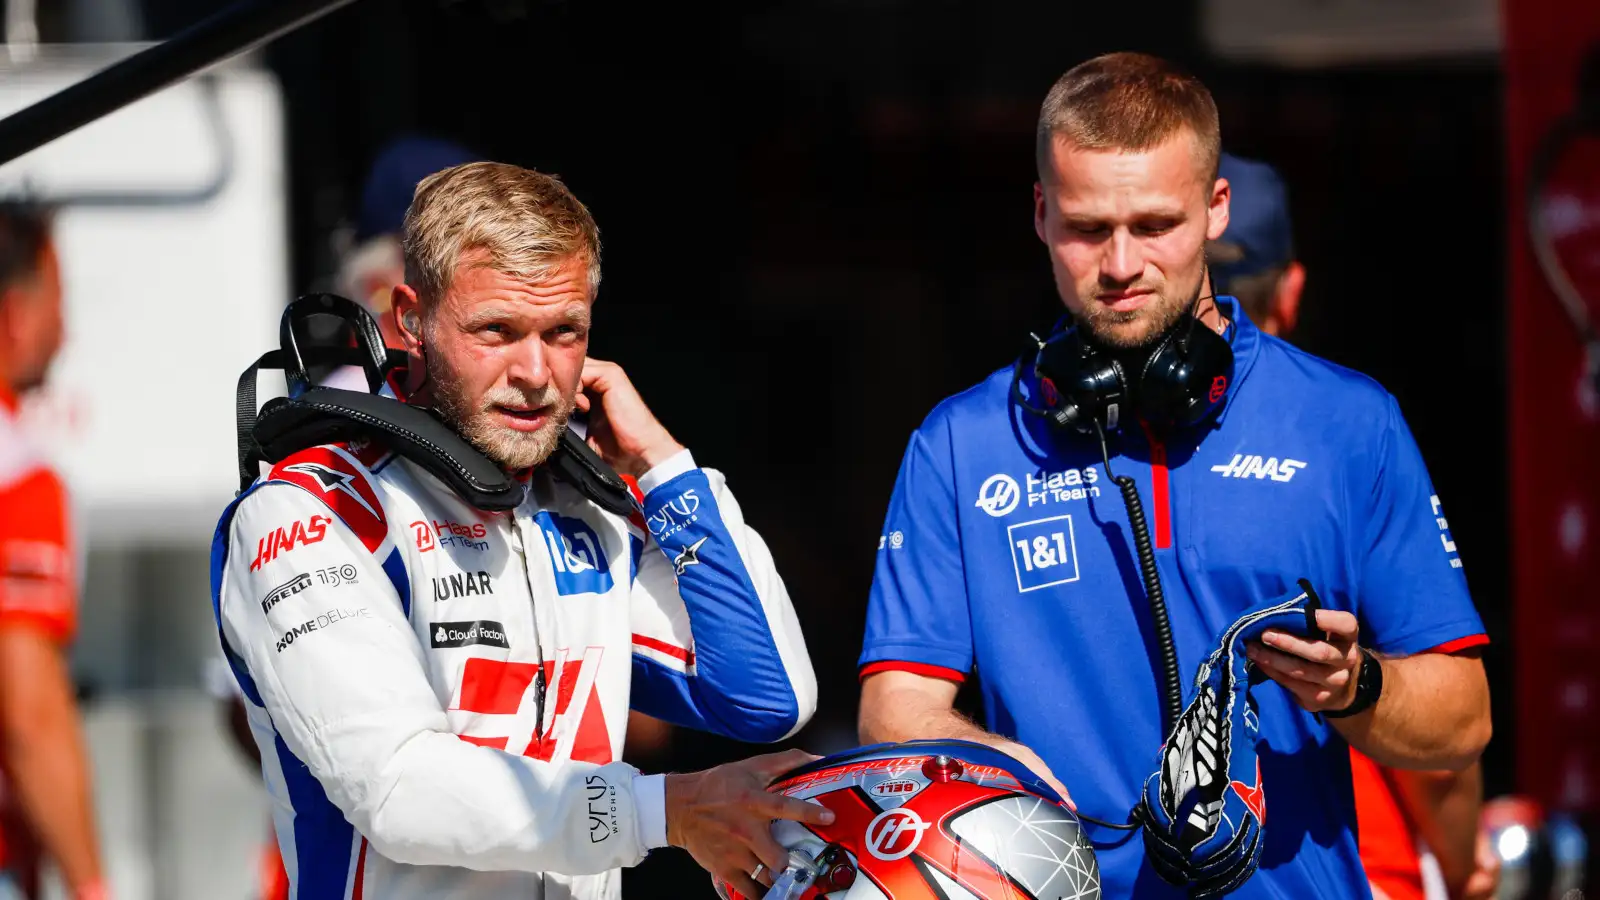 Kevin Magnussen putting on his HANS ahead of a grand prix. Netherlands September 2022